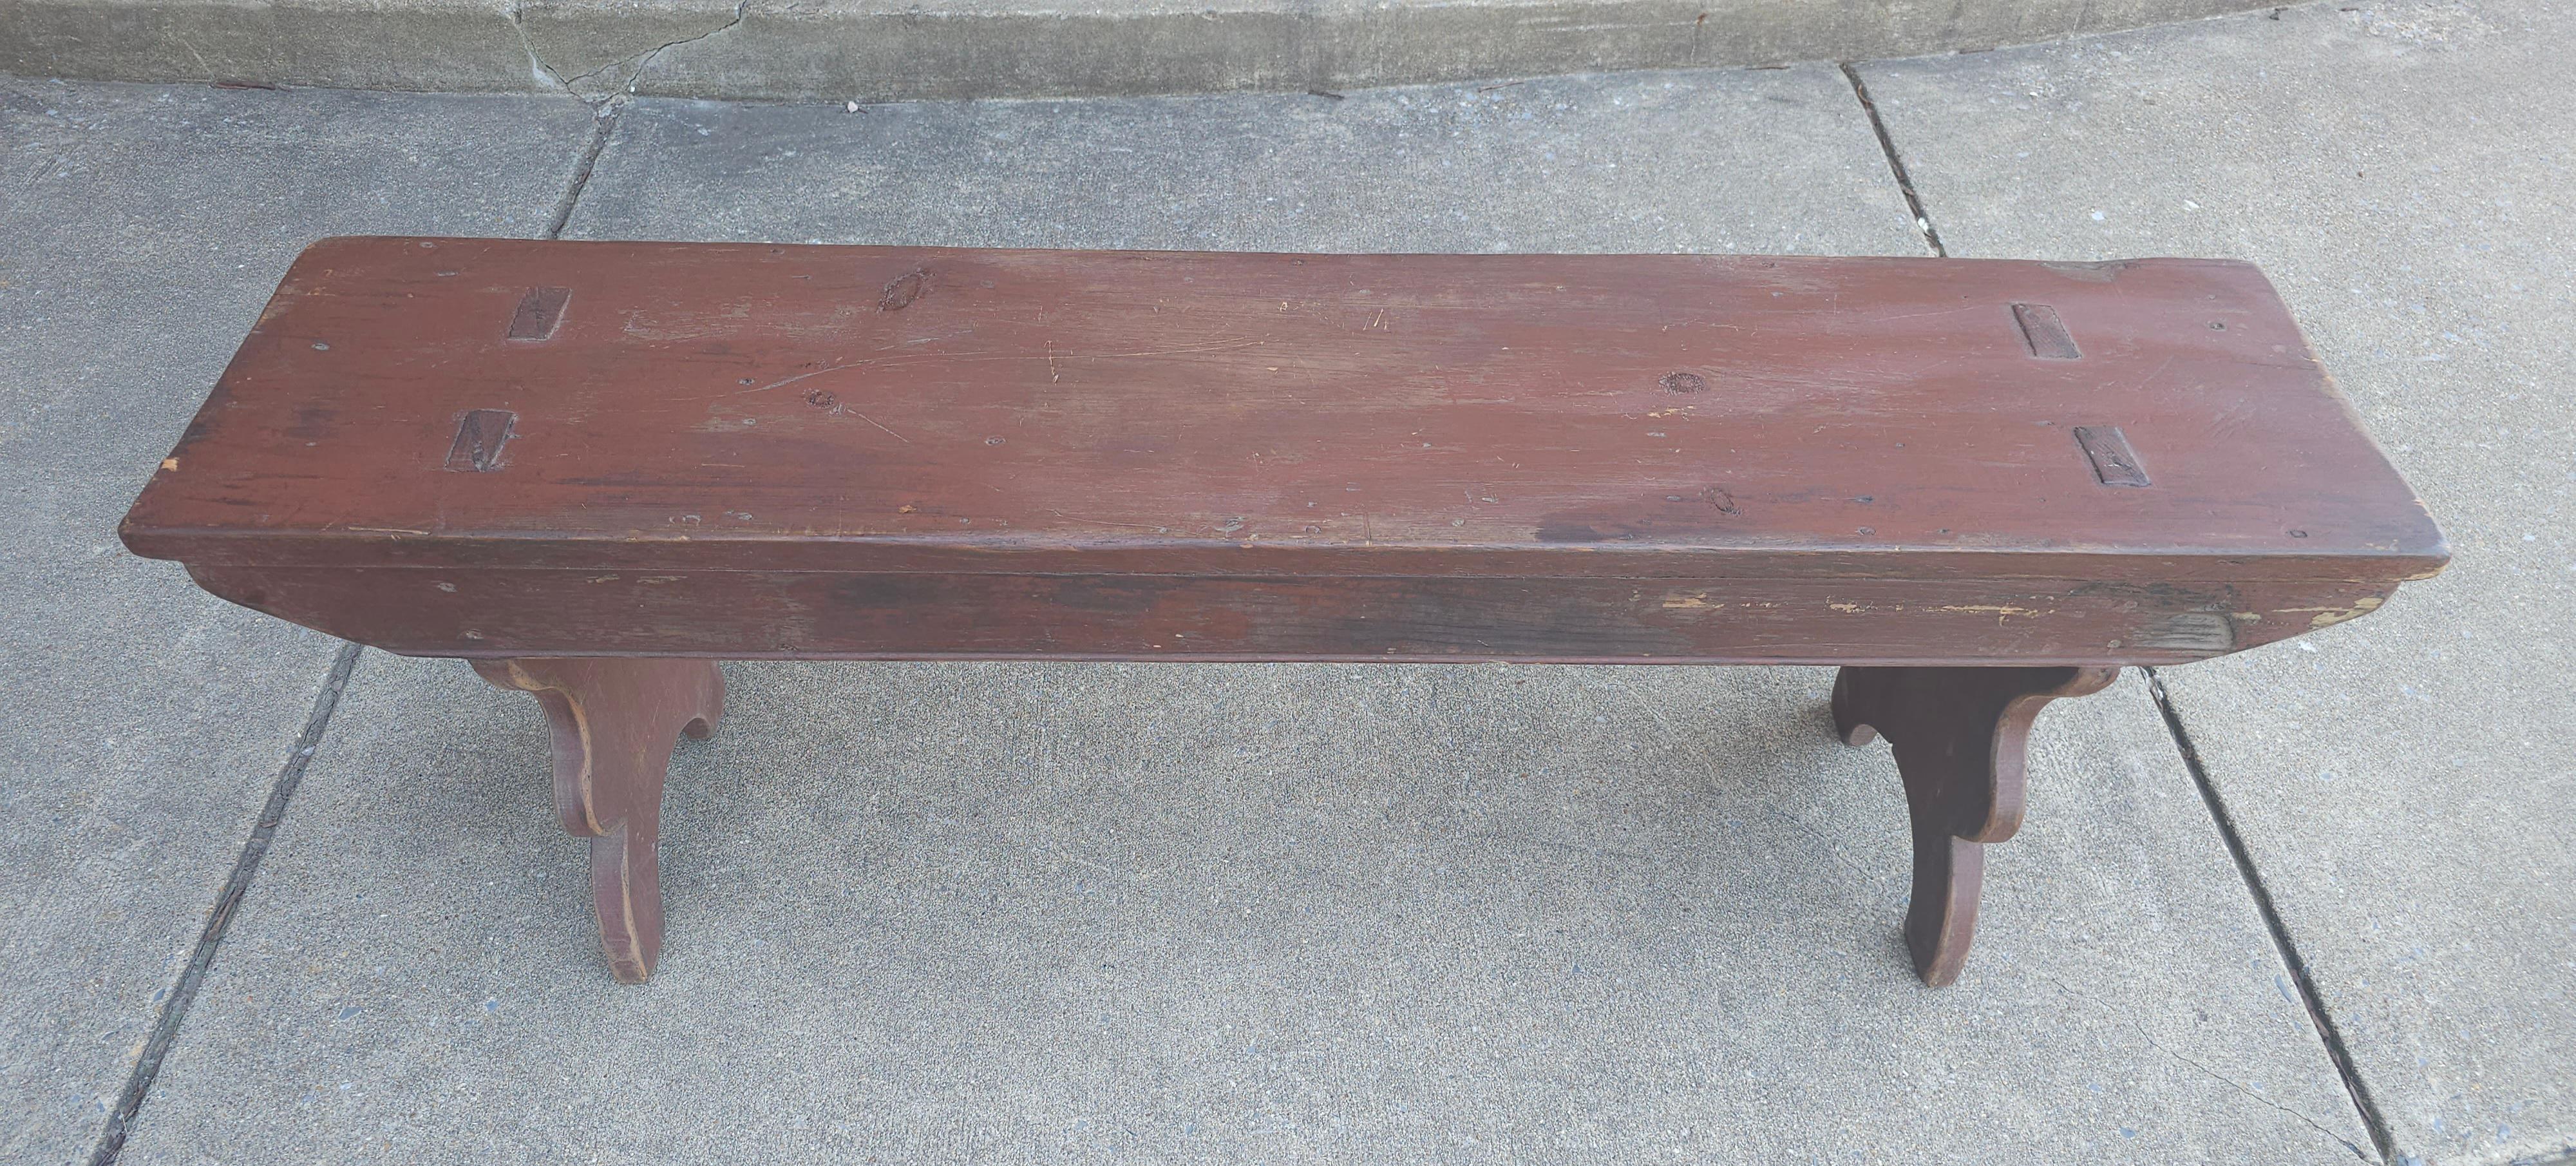 Early American Primitive Bench For Sale 1